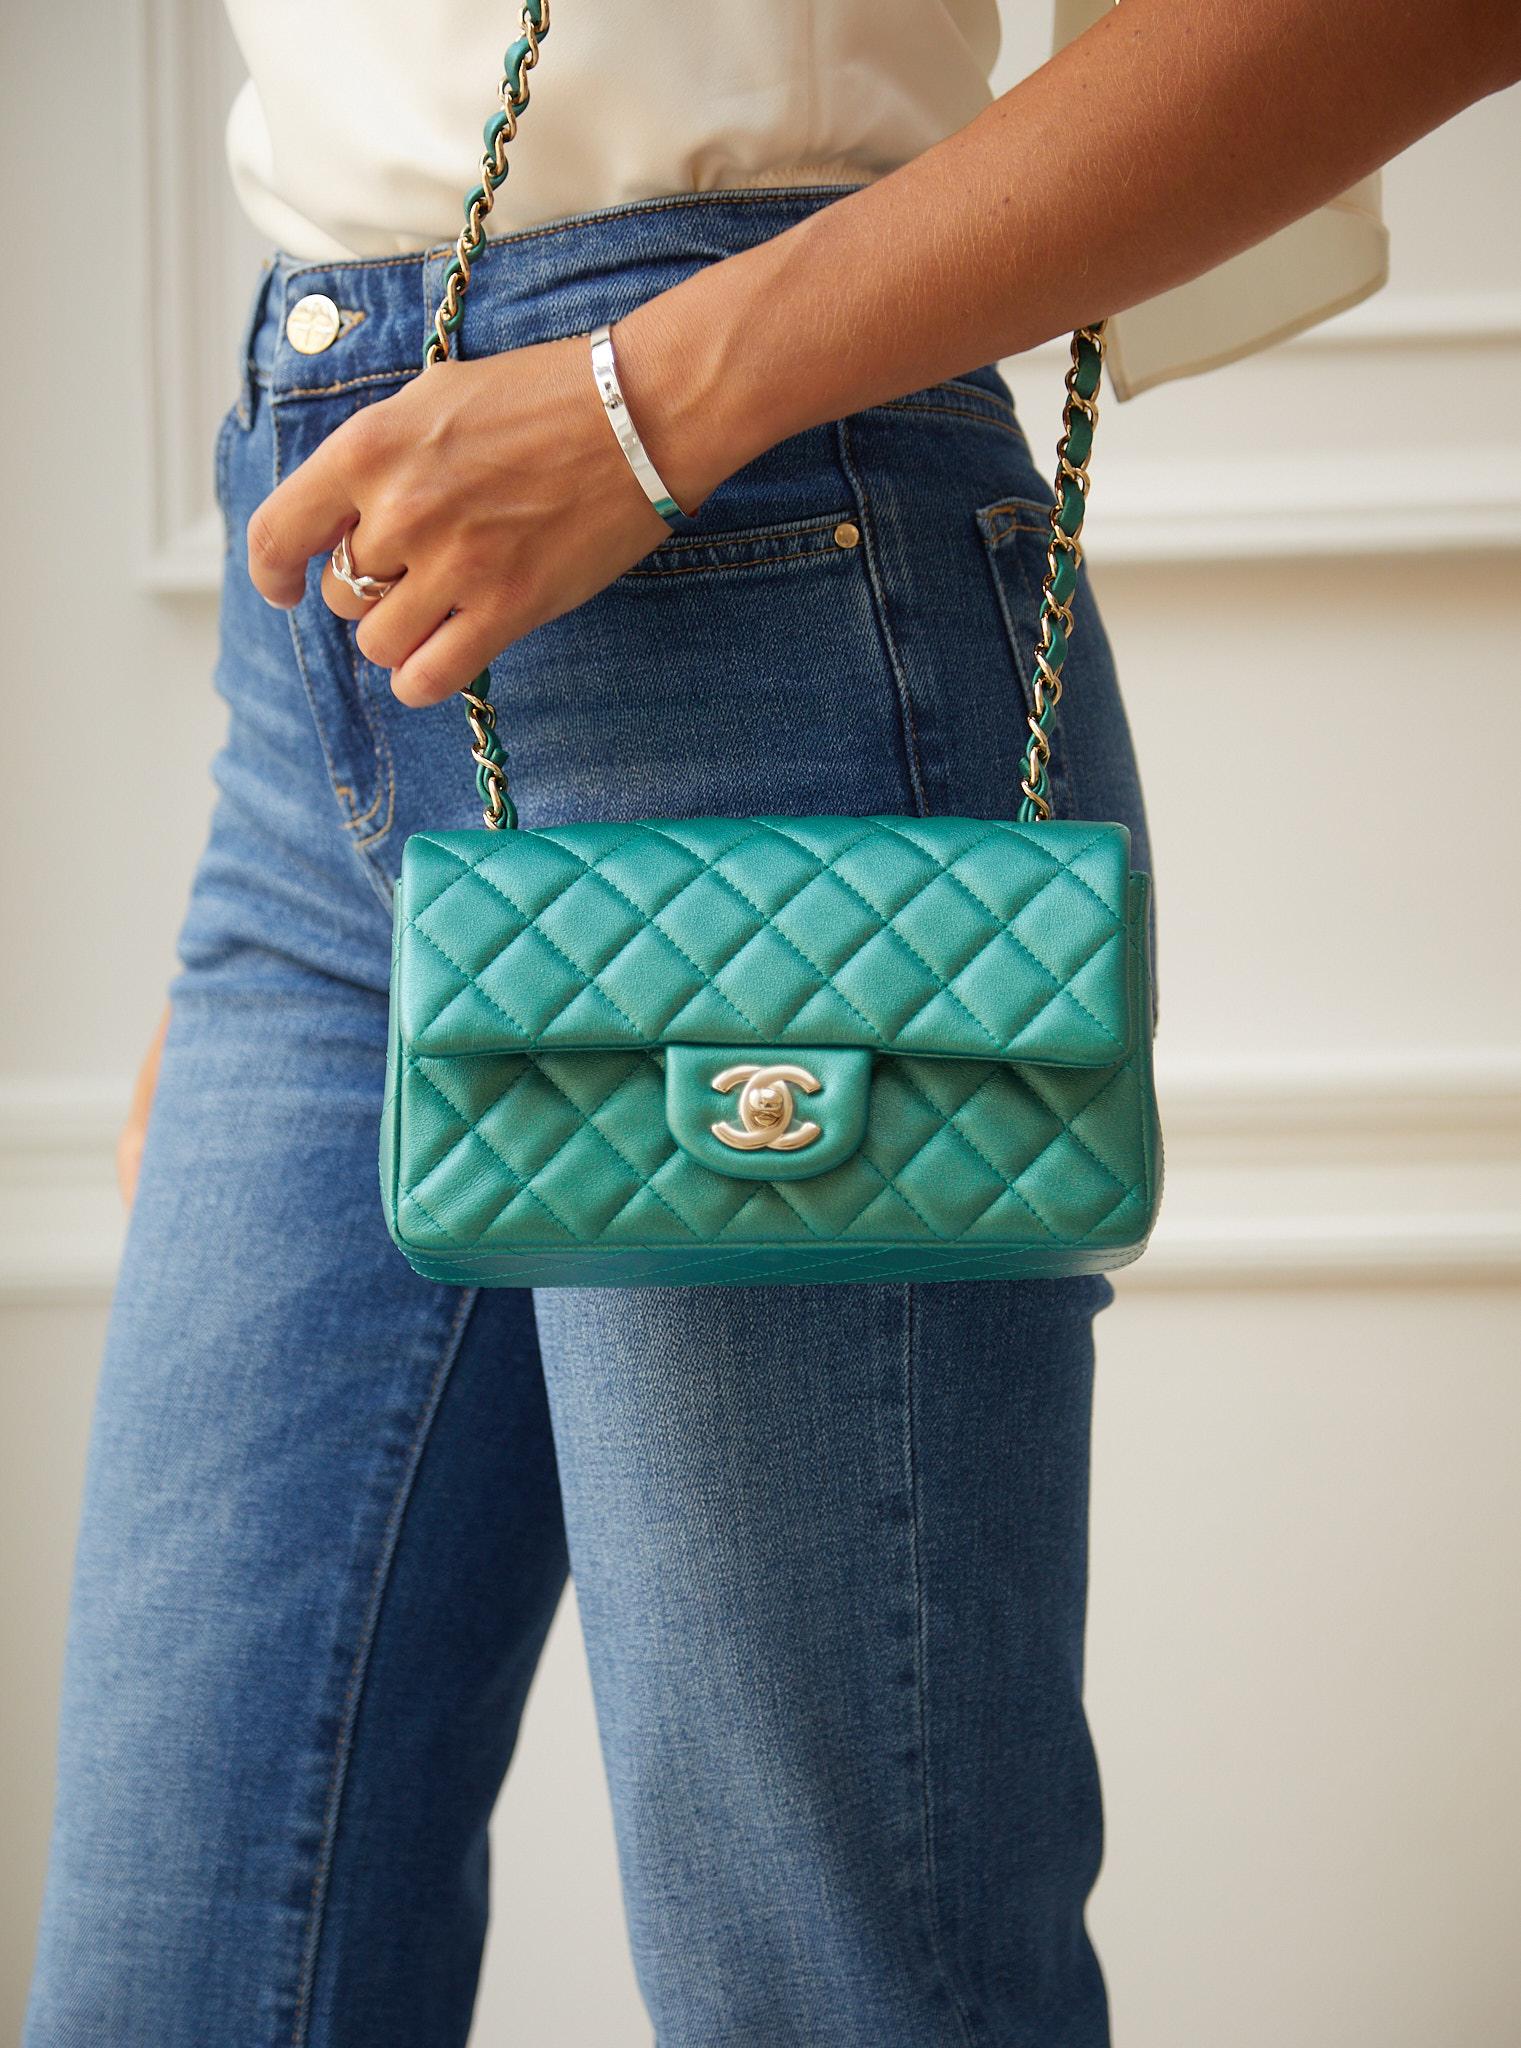 CHANEL MINI FLAP BAG PEARLESCENT GREEN Lambskin Leather with Champagne Hardware 5